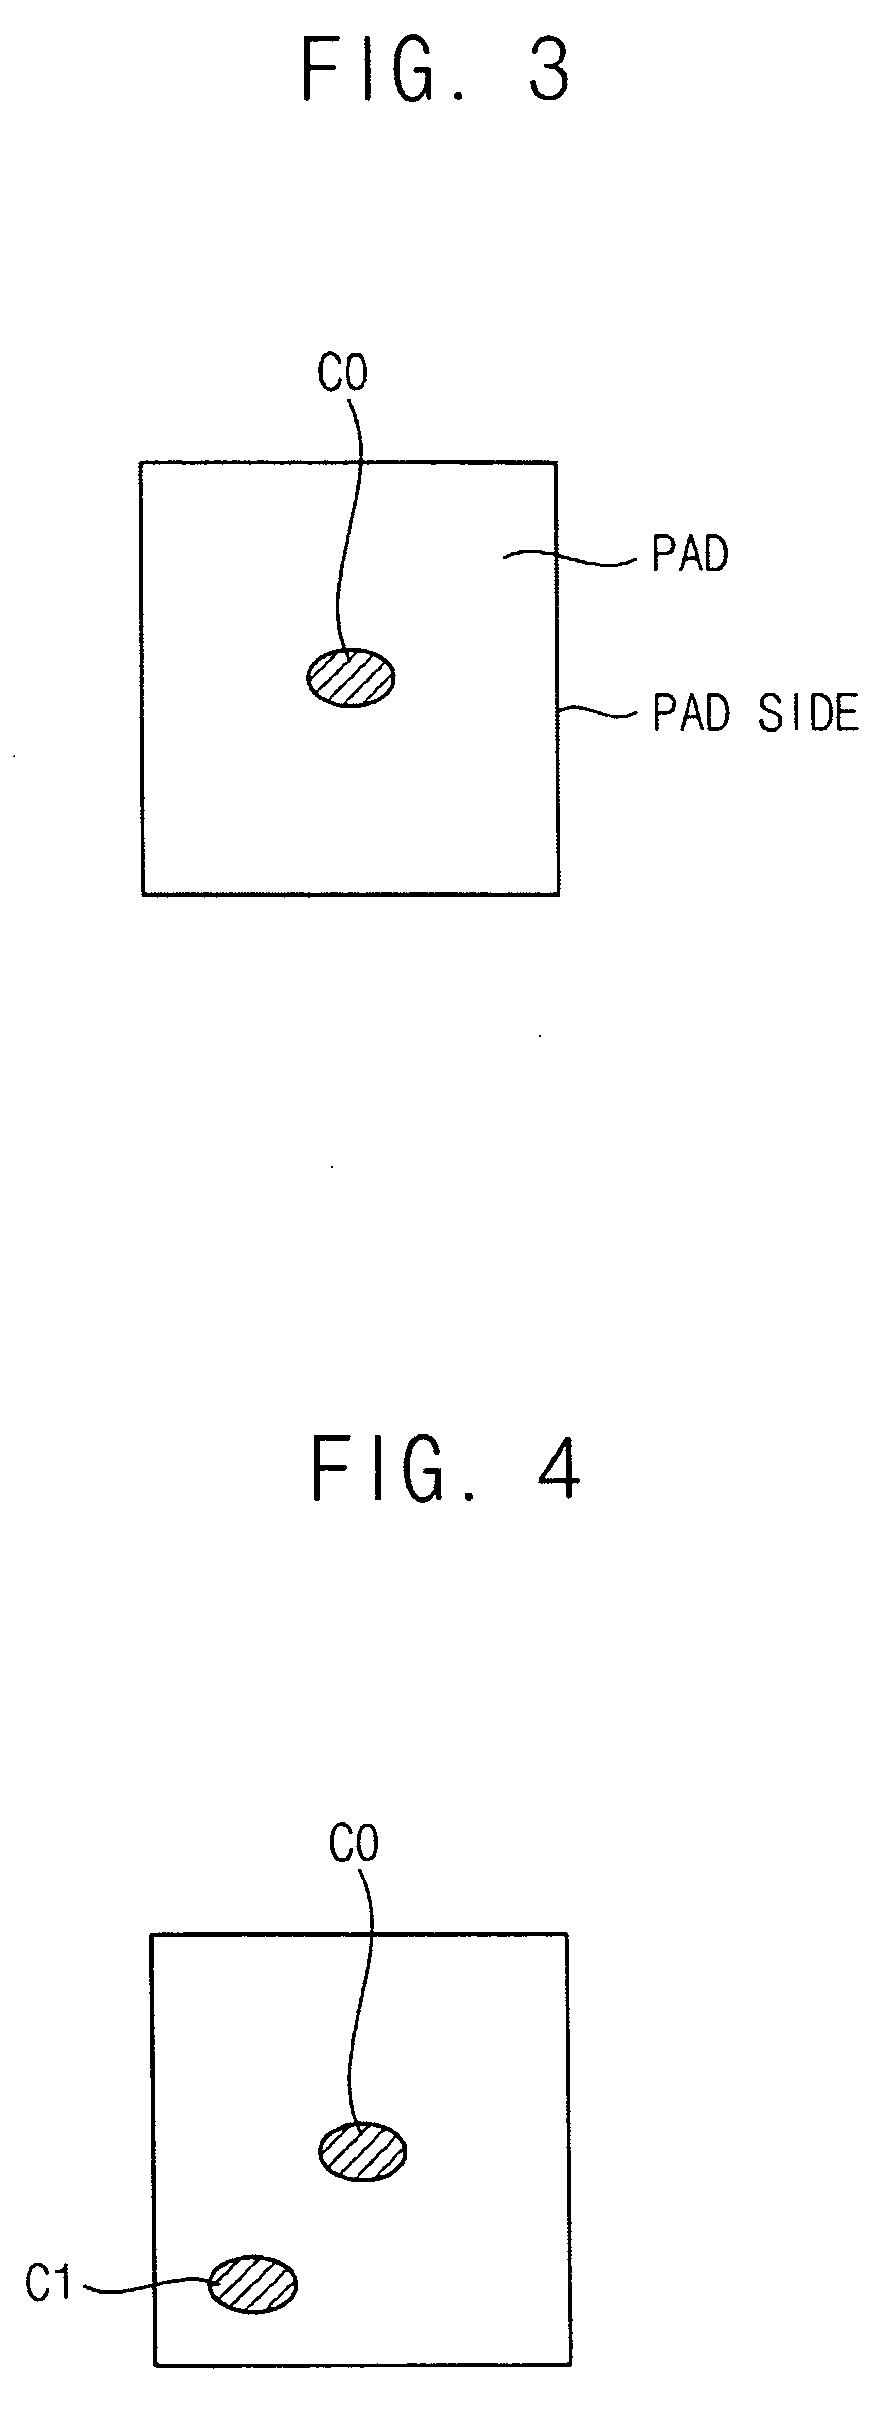 Method of correcting a position of a prober